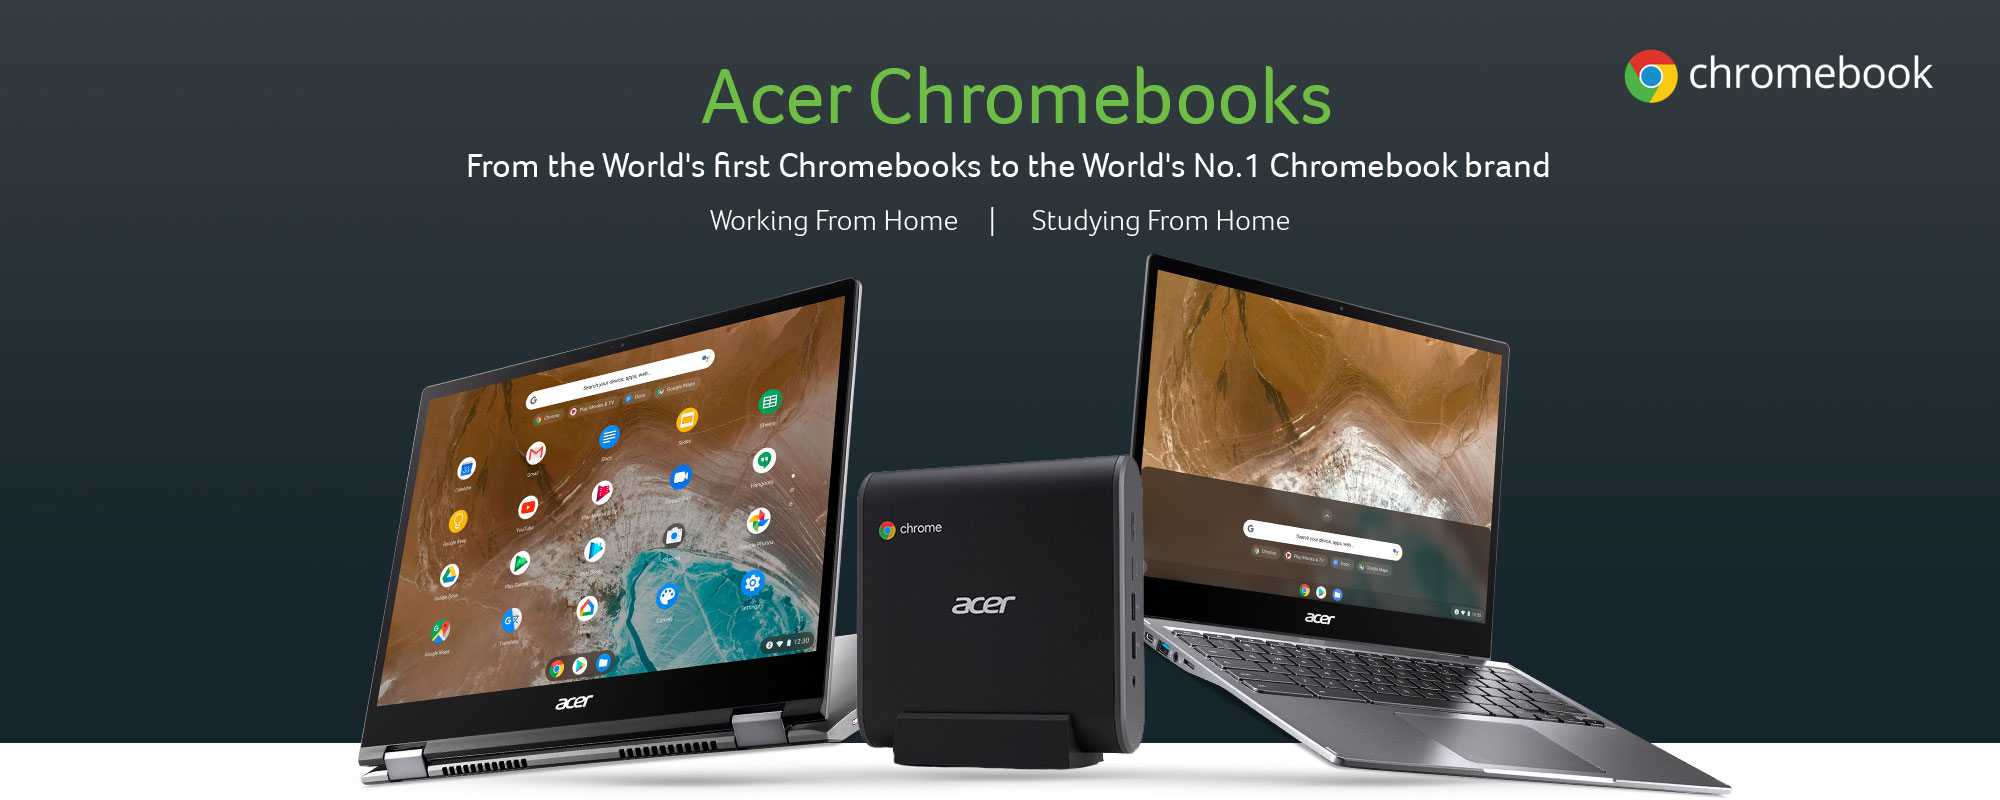 Acer Offers Chrome Education Upgrade For Its Chromebook Lineup